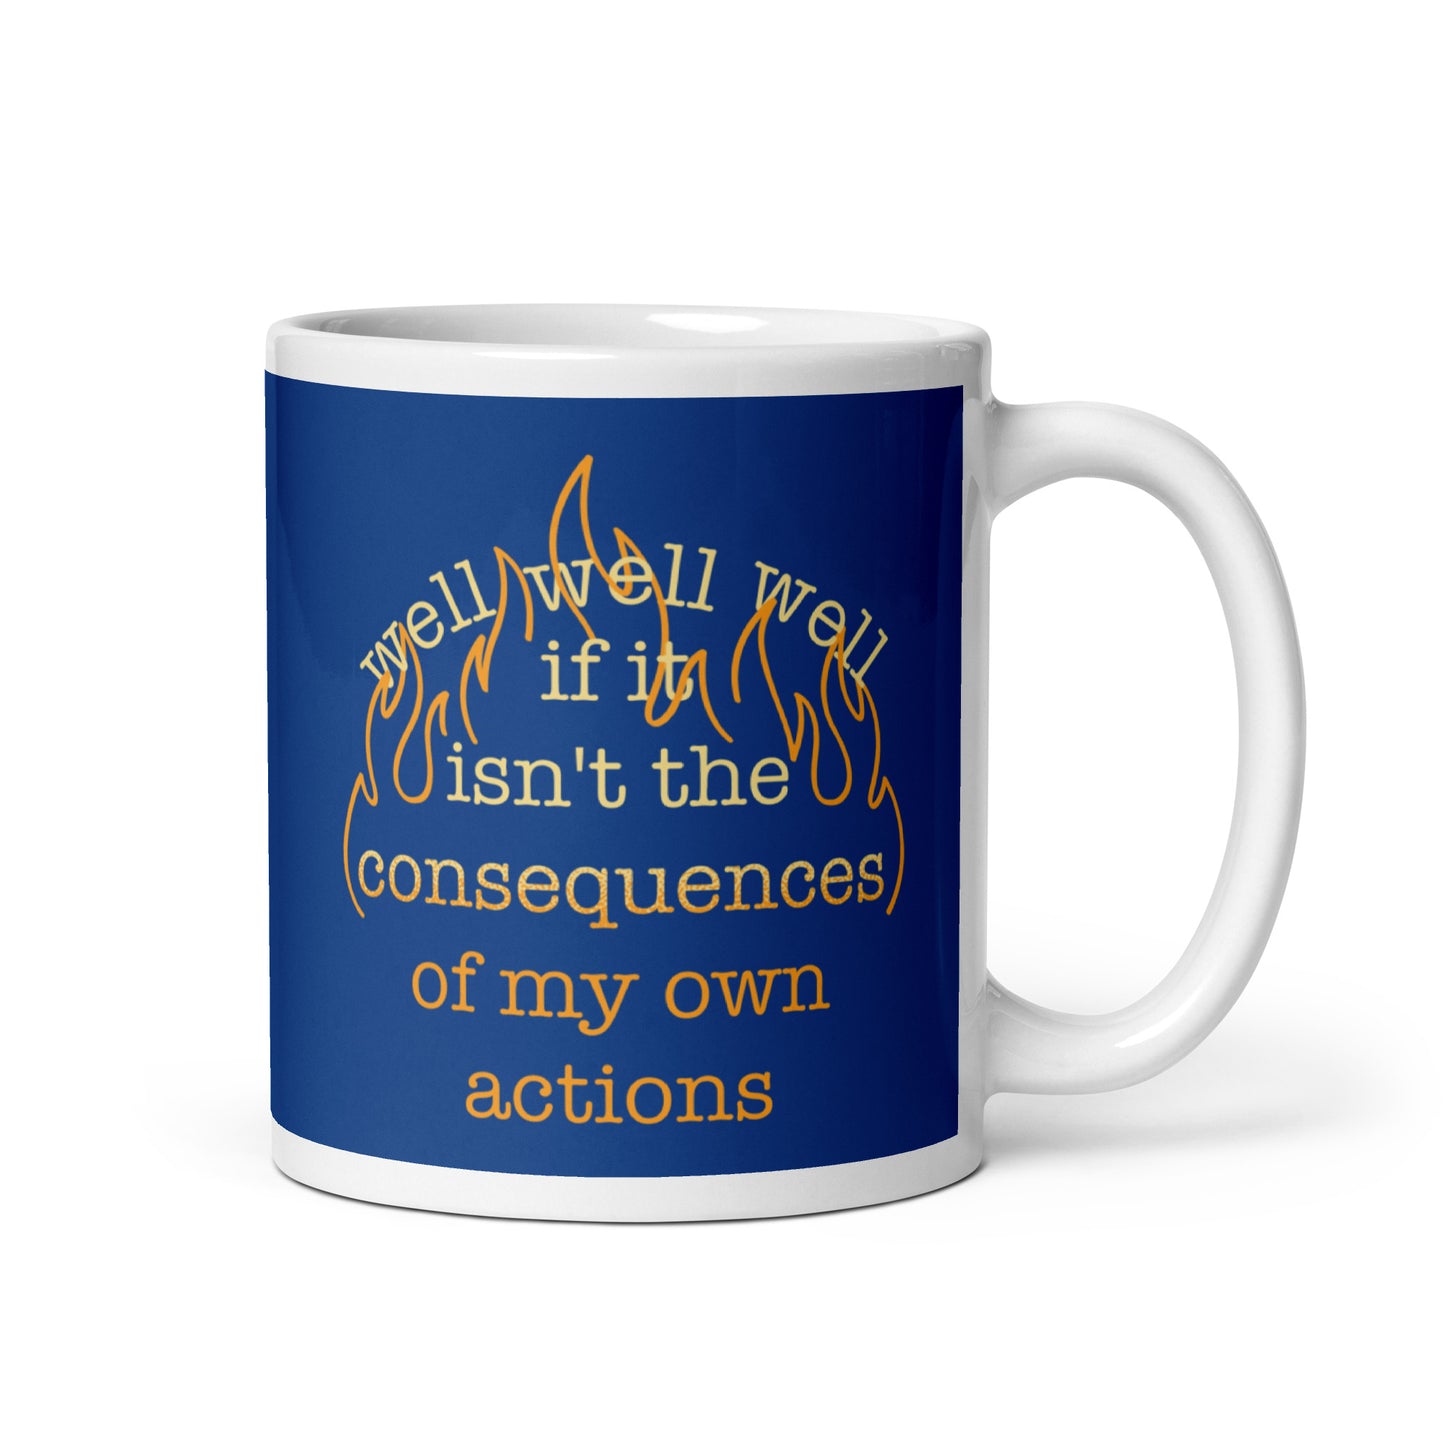 The Consequences Of My Own Actions Mug